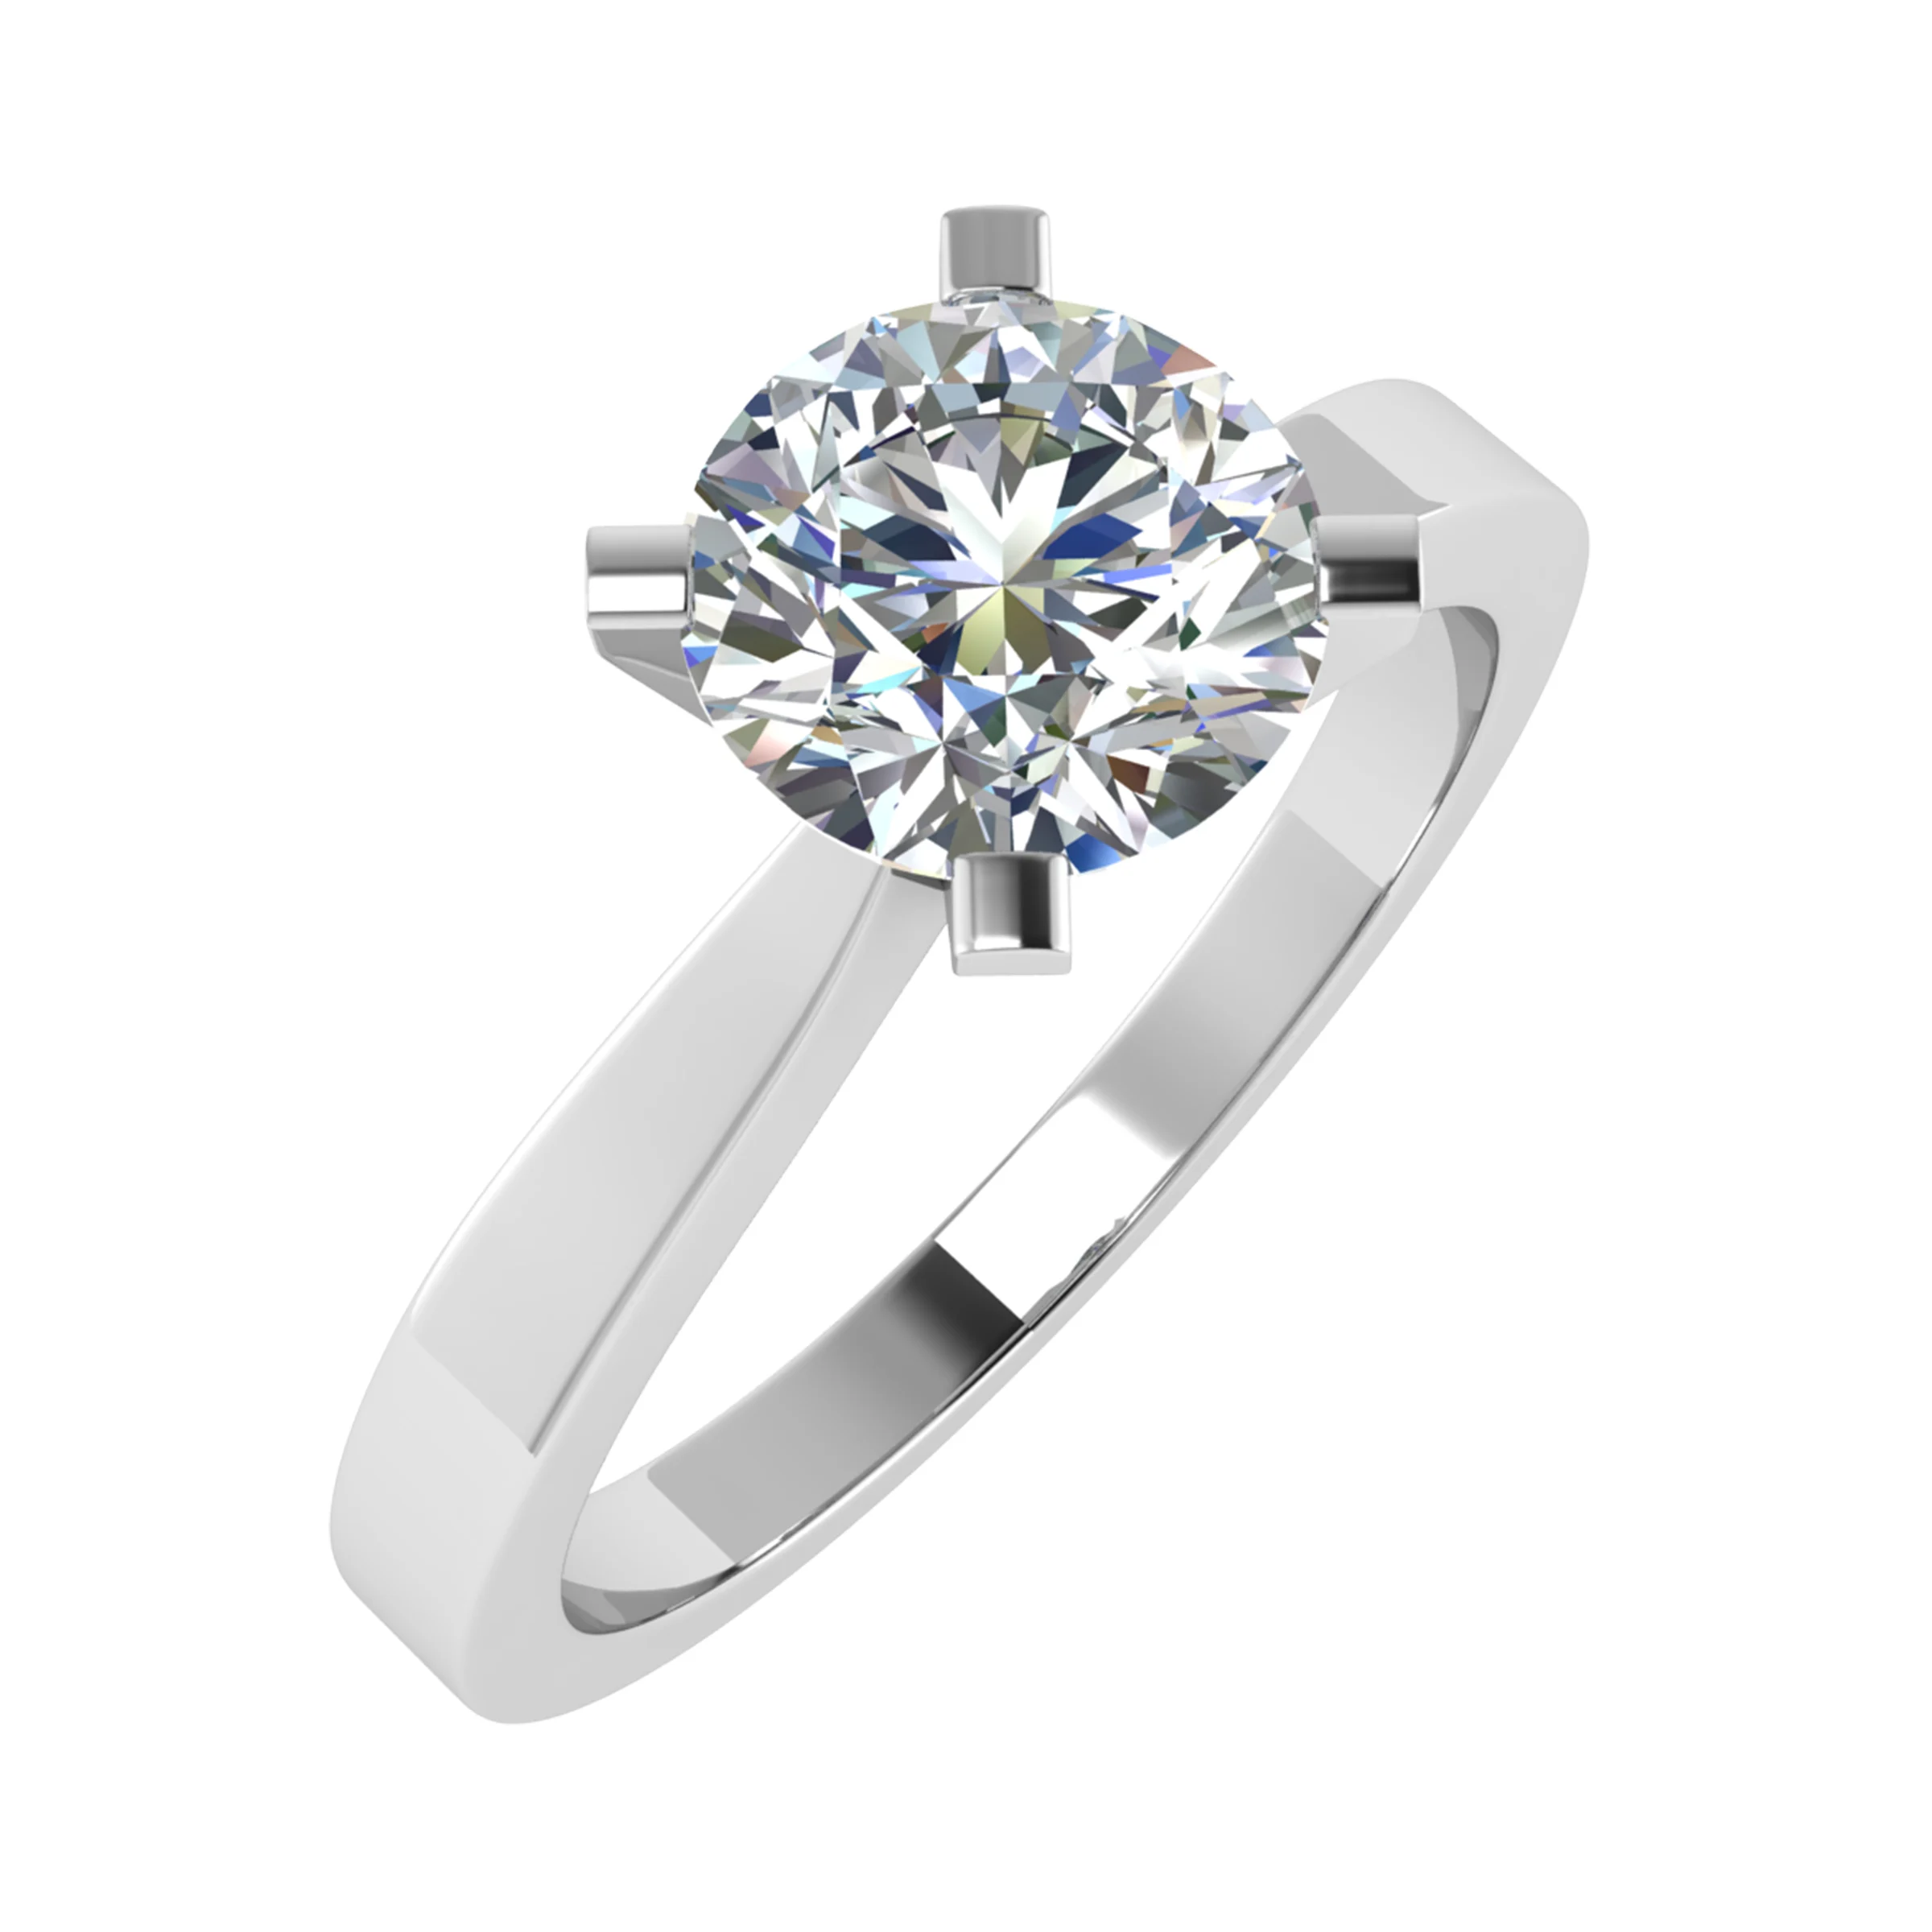 Jane 4 Prong Solitaire Engagement Ring 